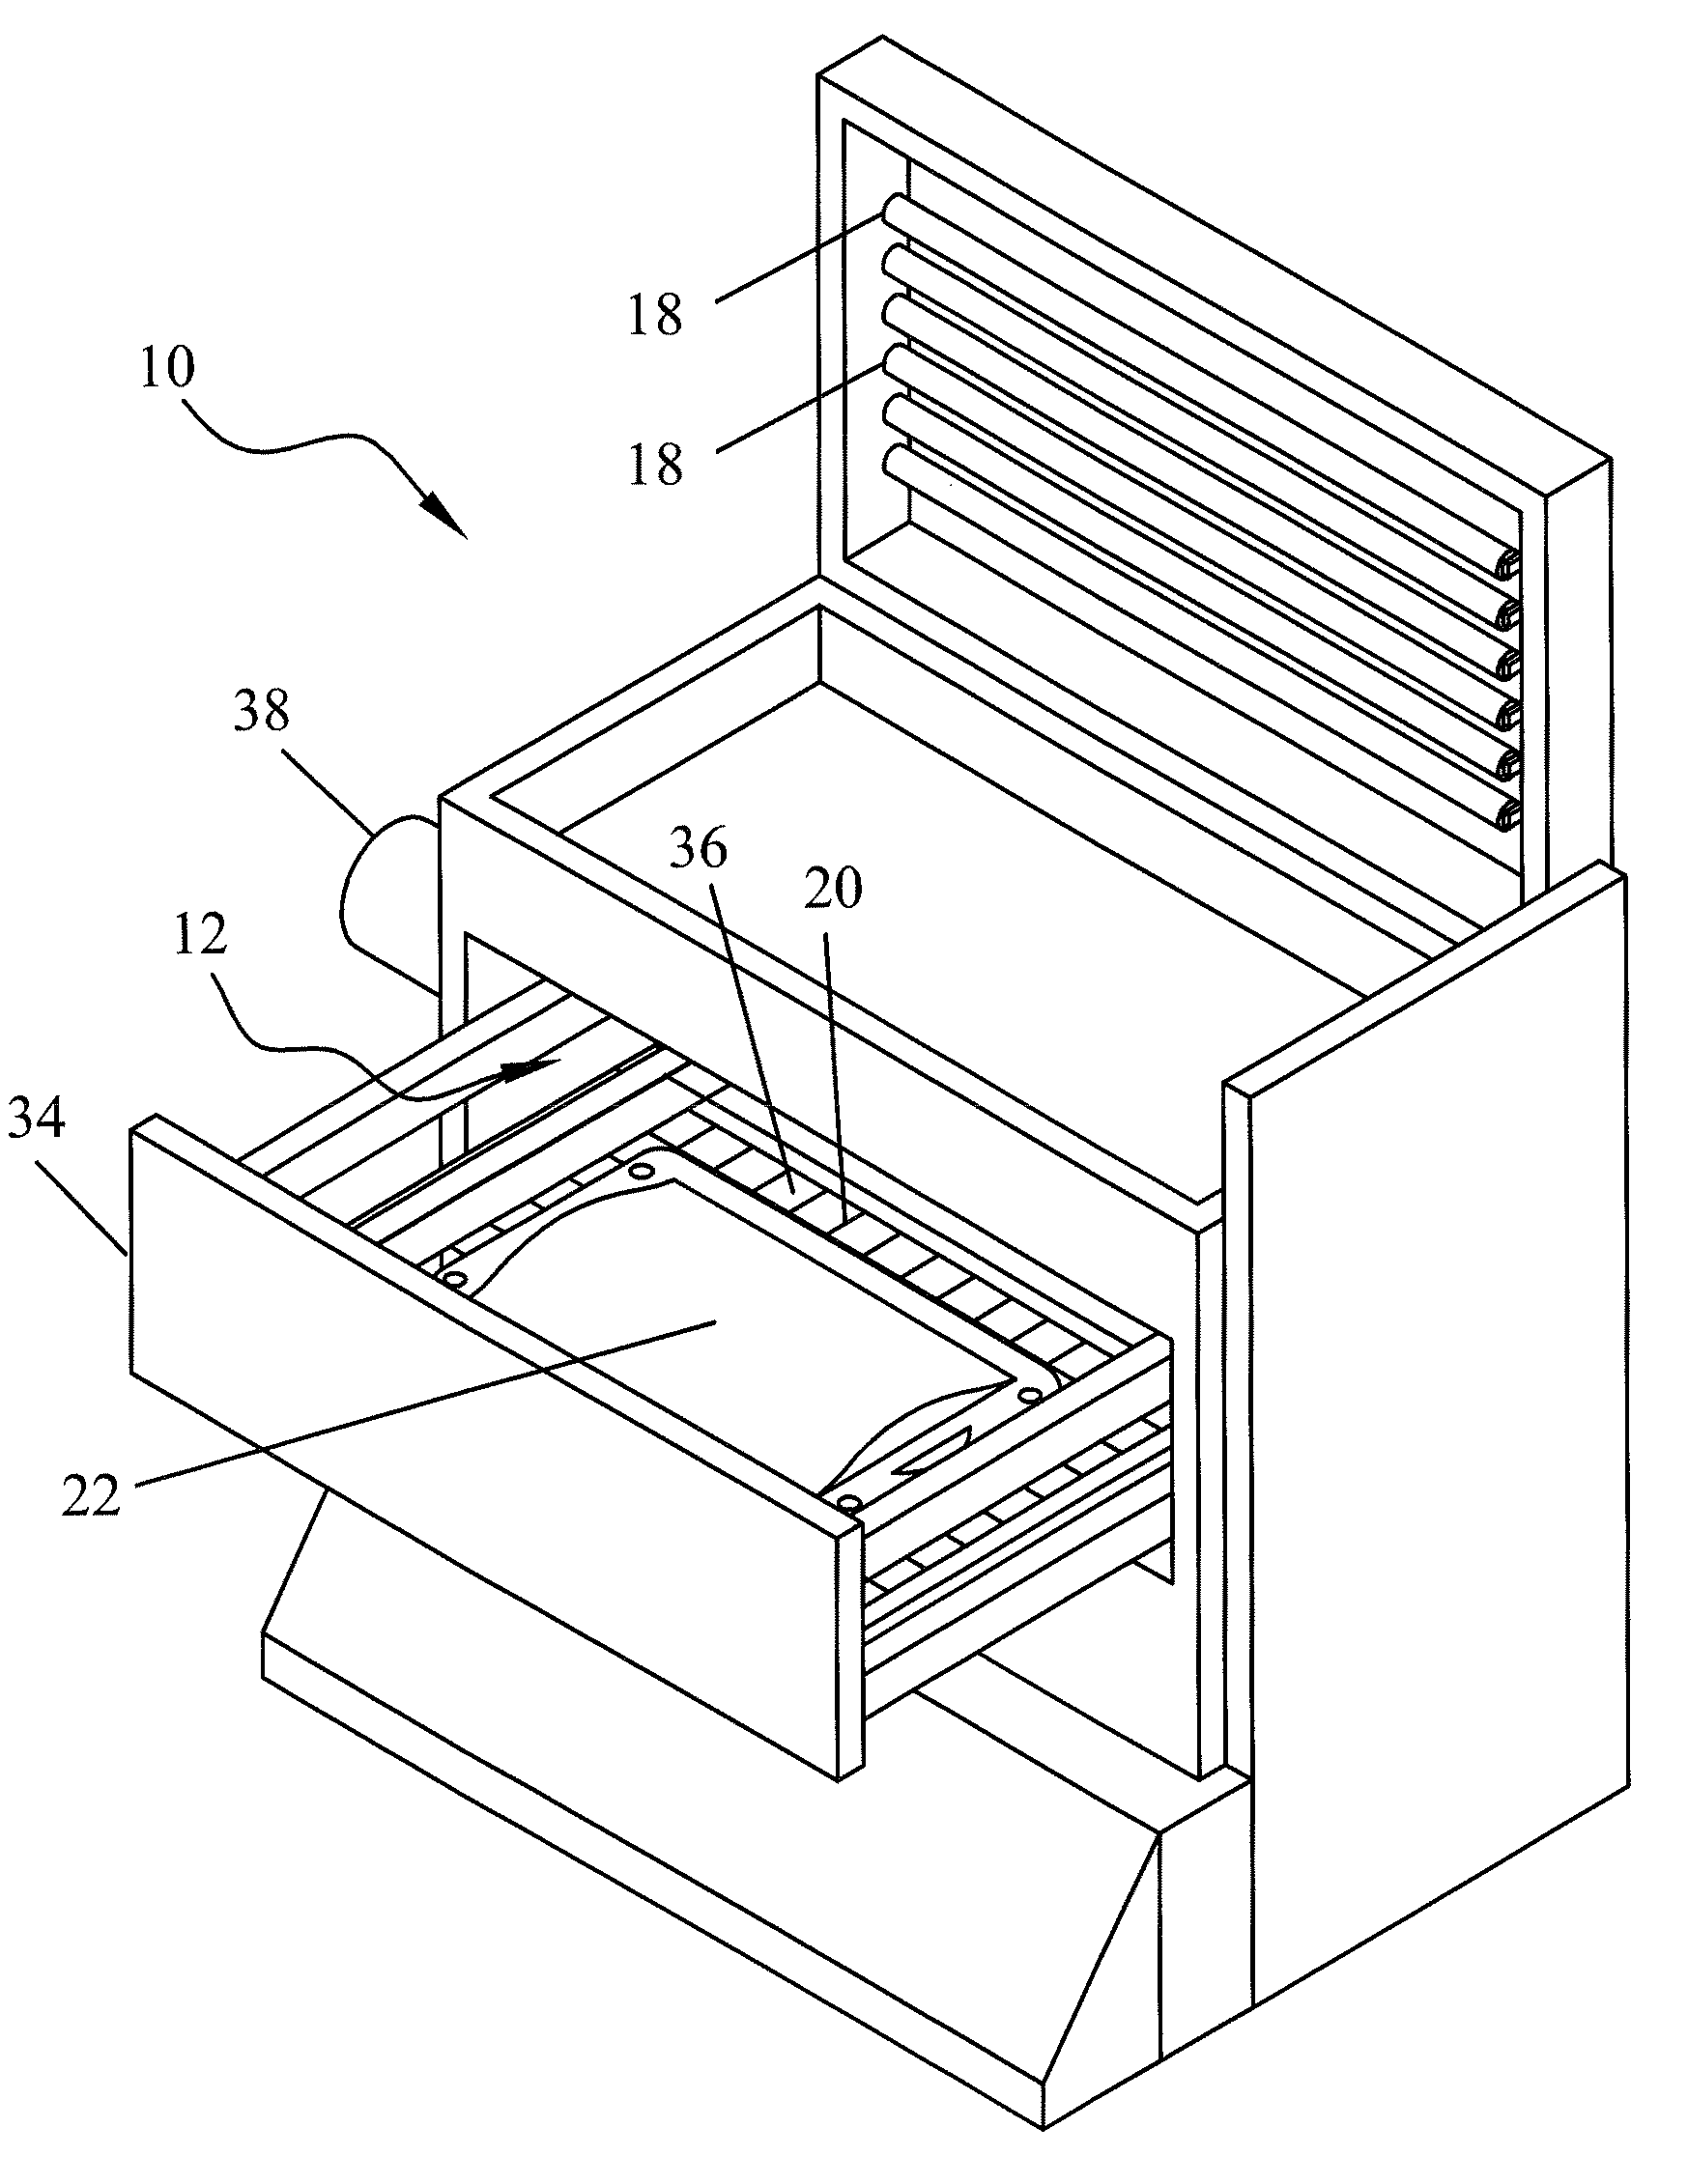 Apparatus for photo reduction of contaminants in blood and blood products with calibration means